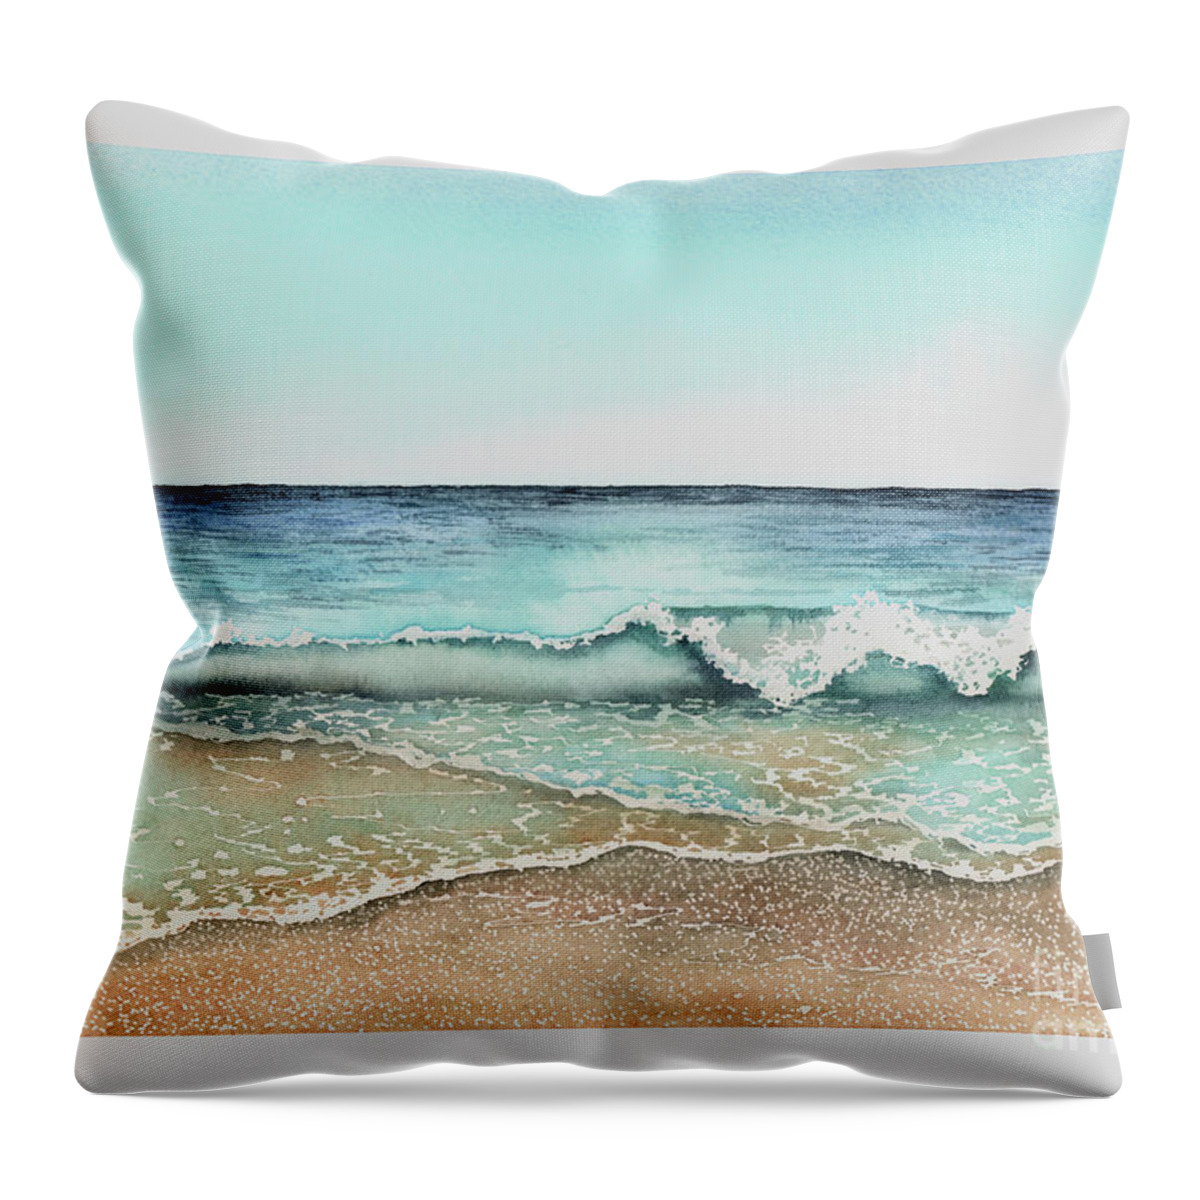 Gulf Coast Throw Pillow featuring the painting Surging Seas by Hilda Wagner